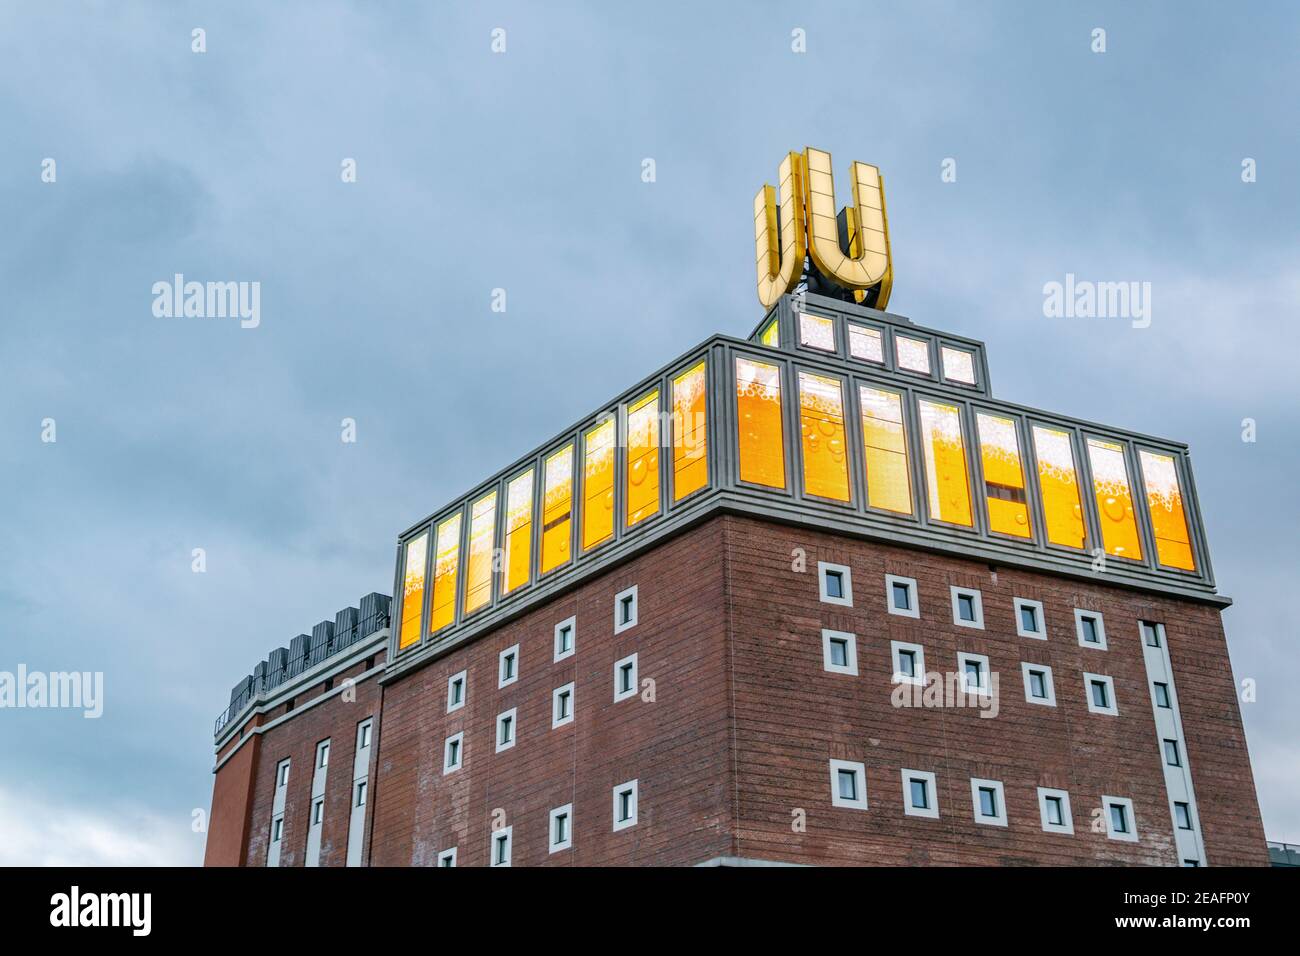 View of the U Tower in Dortmund, Germany Stock Photo - Alamy